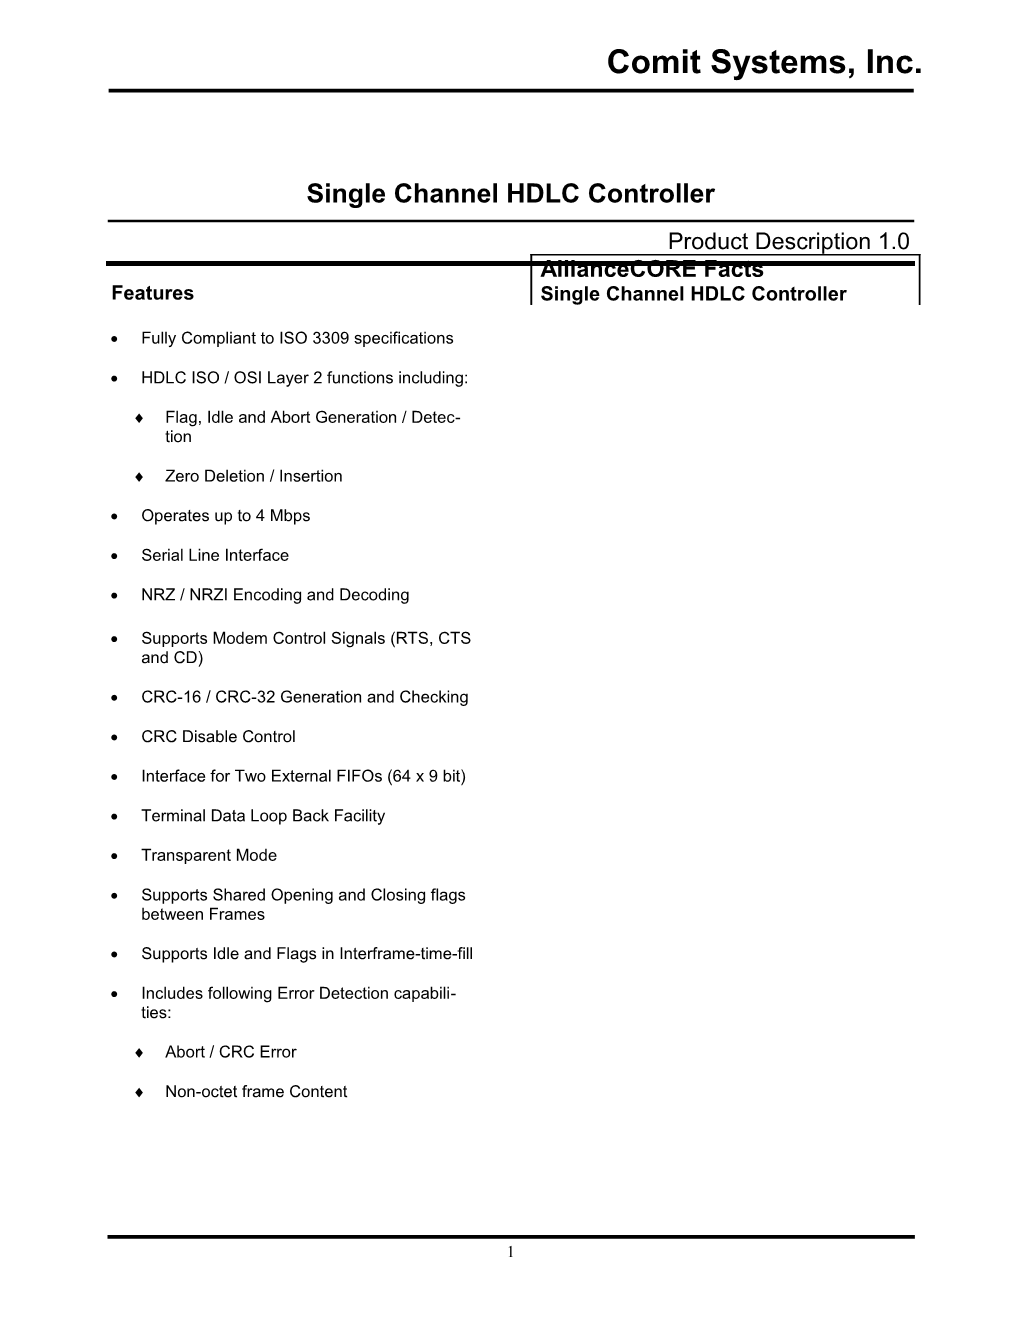 Single Channel HDLC Controller